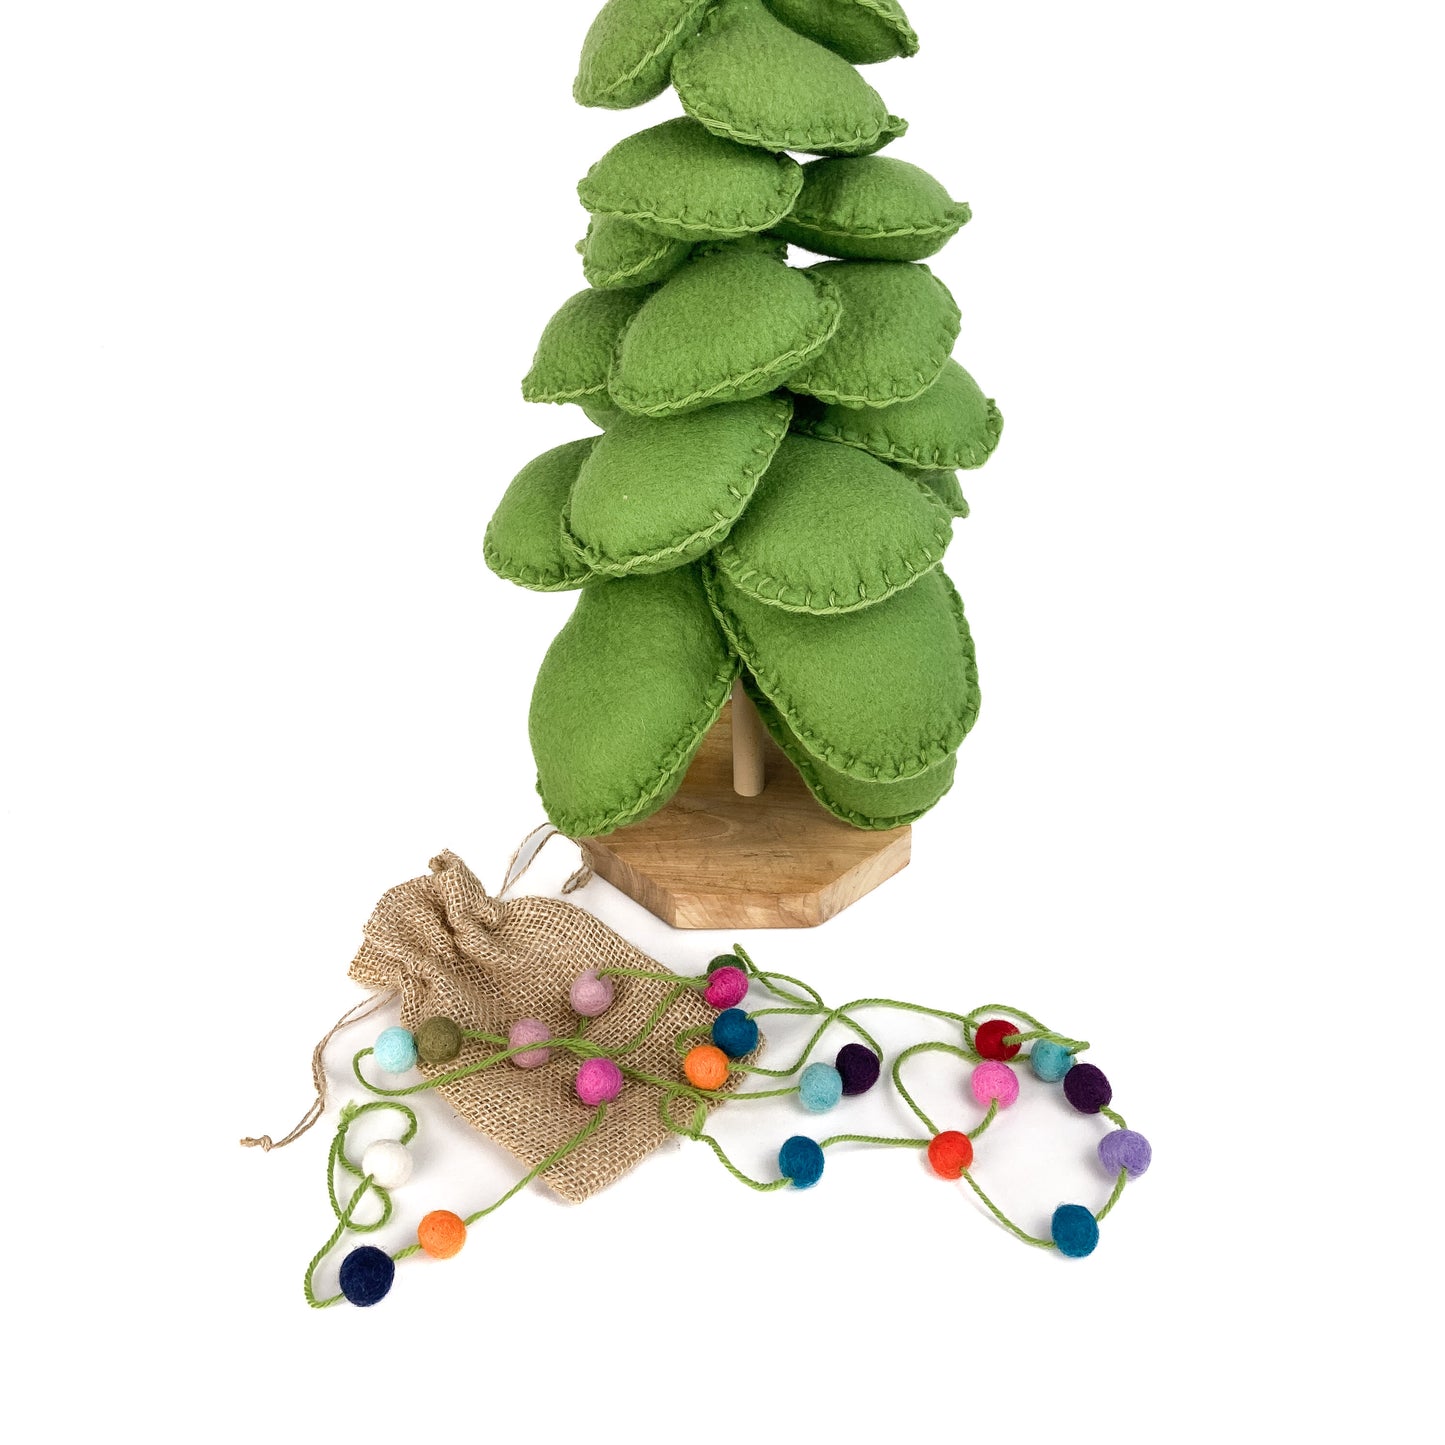 Felted Holiday Tree #206